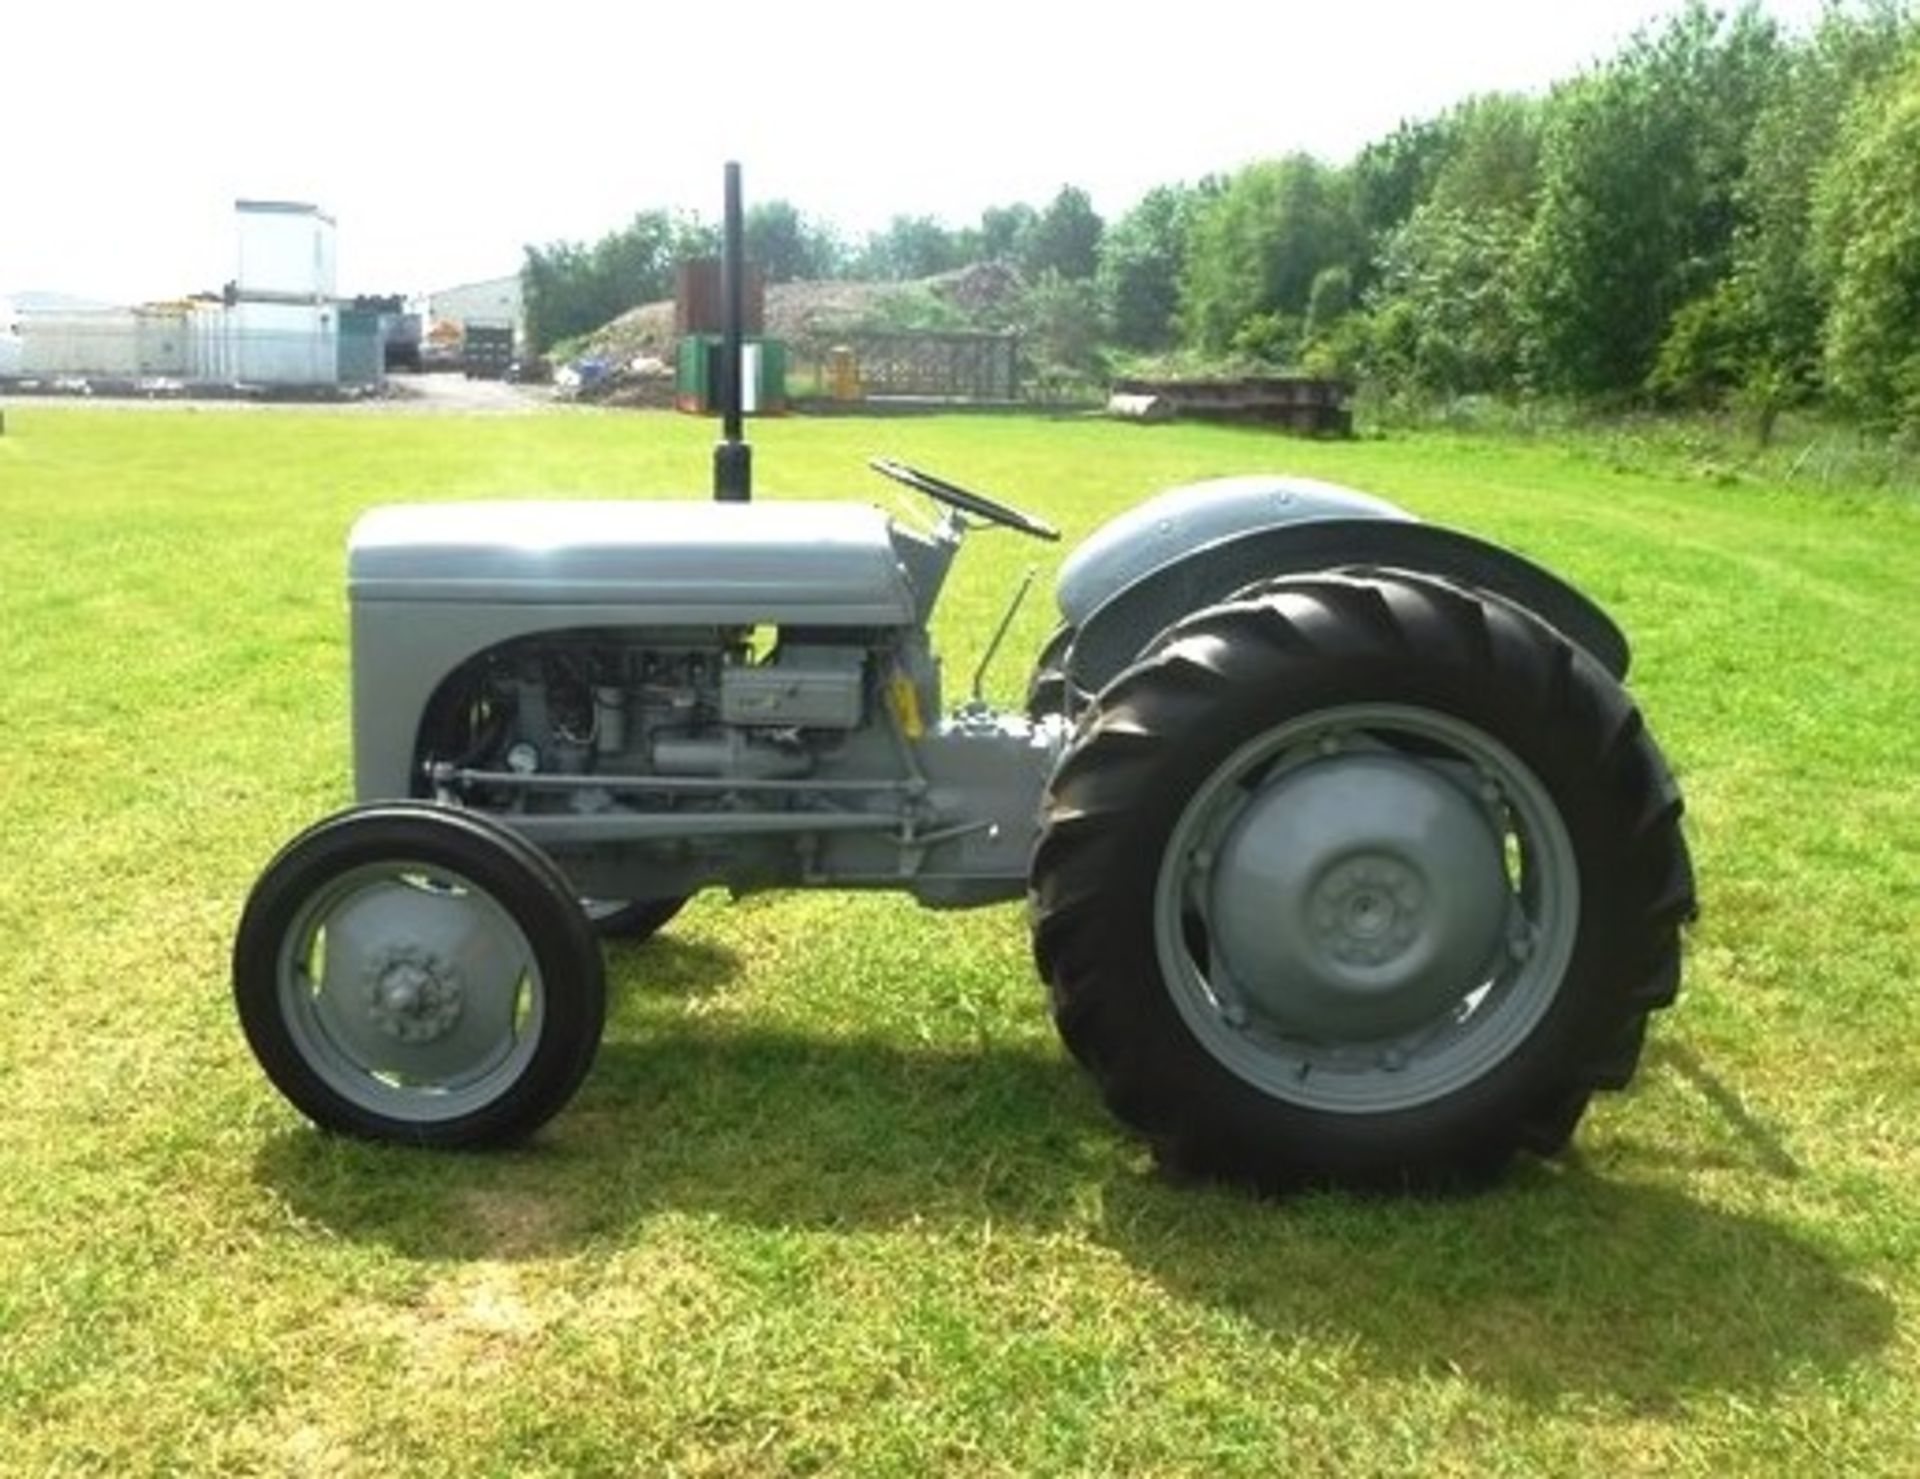 1951 MASSEY FERGUSON TED20 PETROL TRACTOR (GREY) MILEAGE NOT KNOWN - NO DIAL - Image 11 of 12